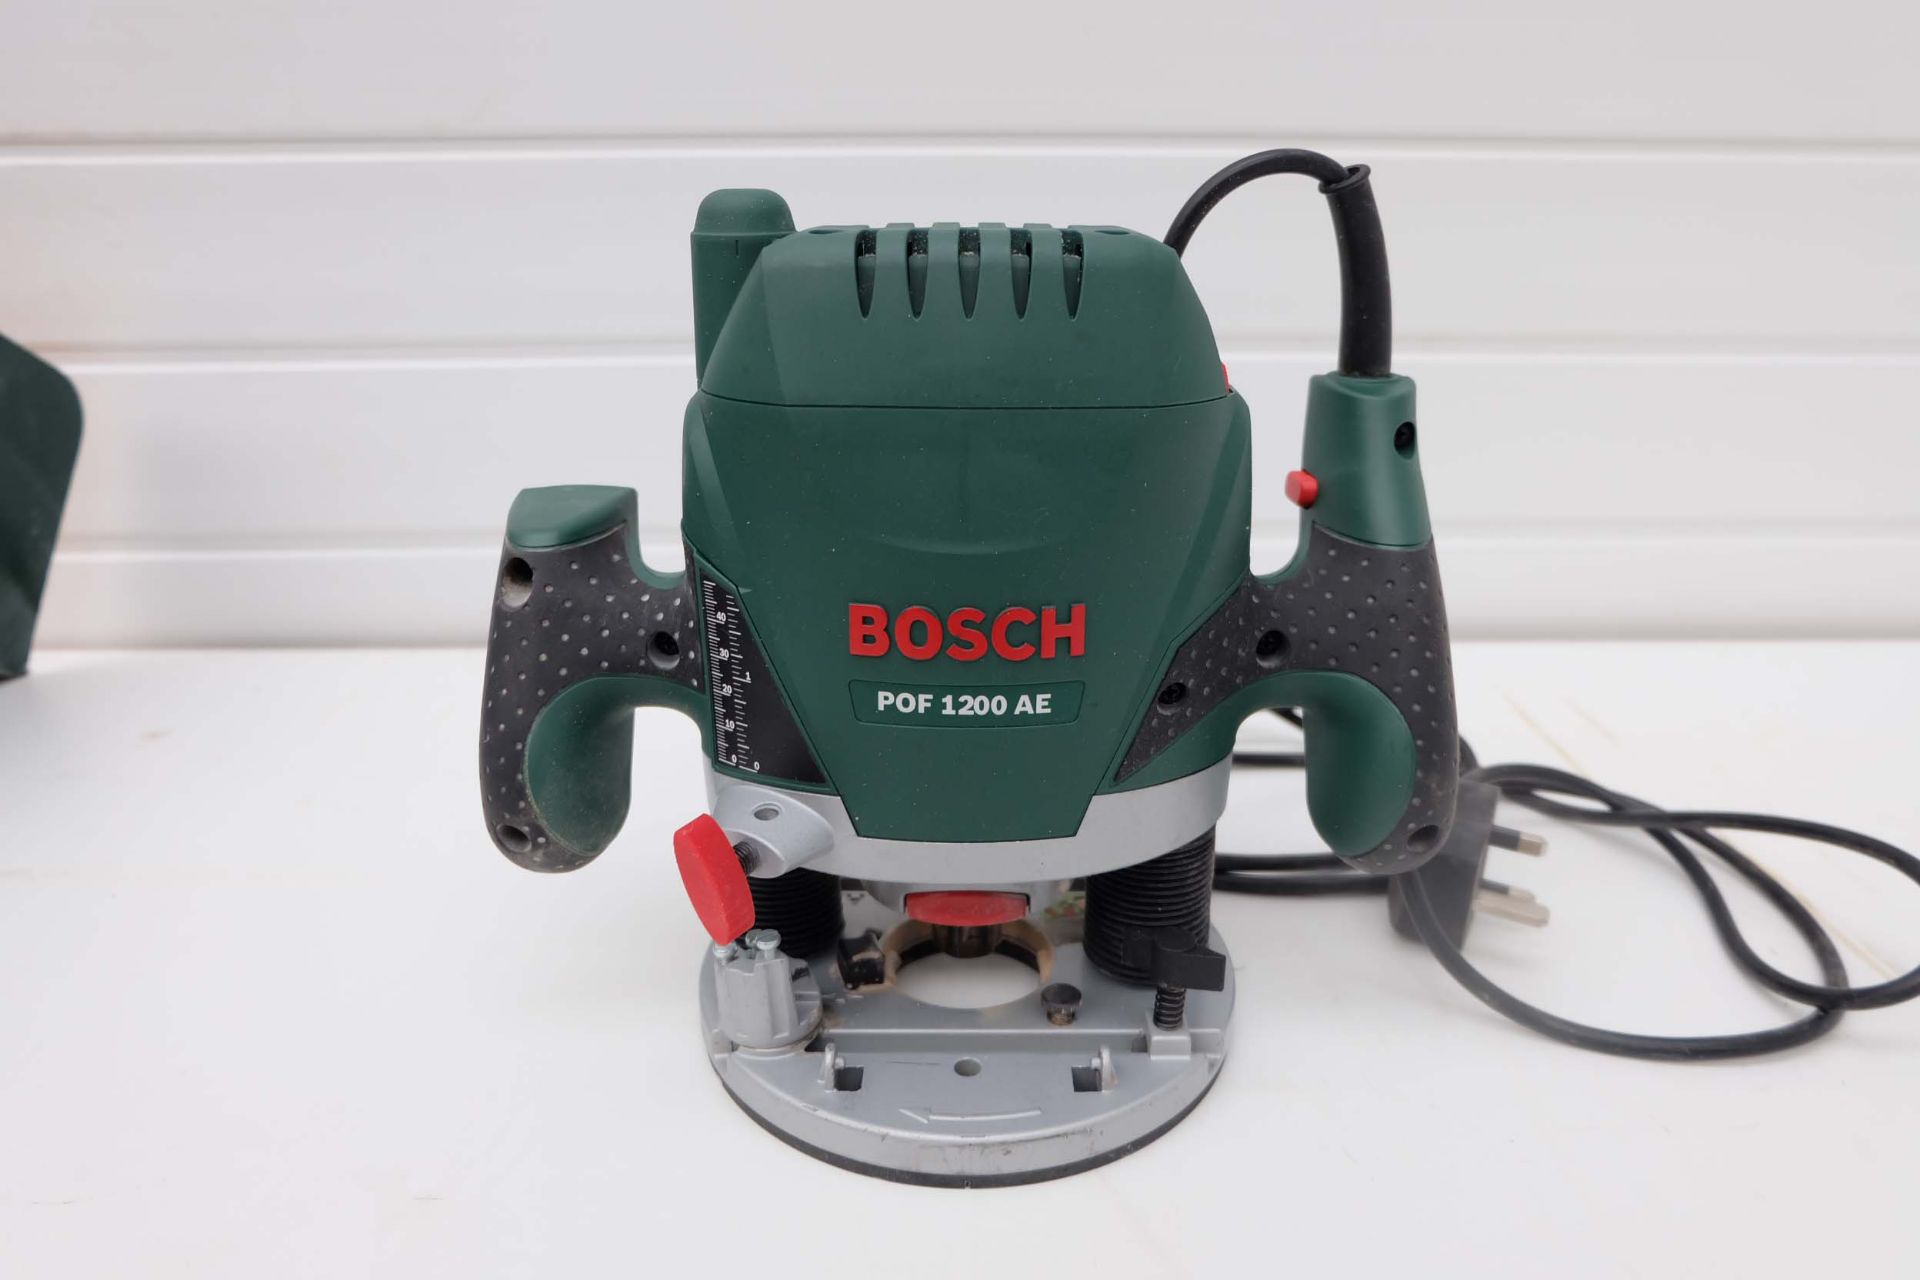 Bosch POF1200AE Electronic Plunging Router. 230V,1200W Motor. With Box of Bits.